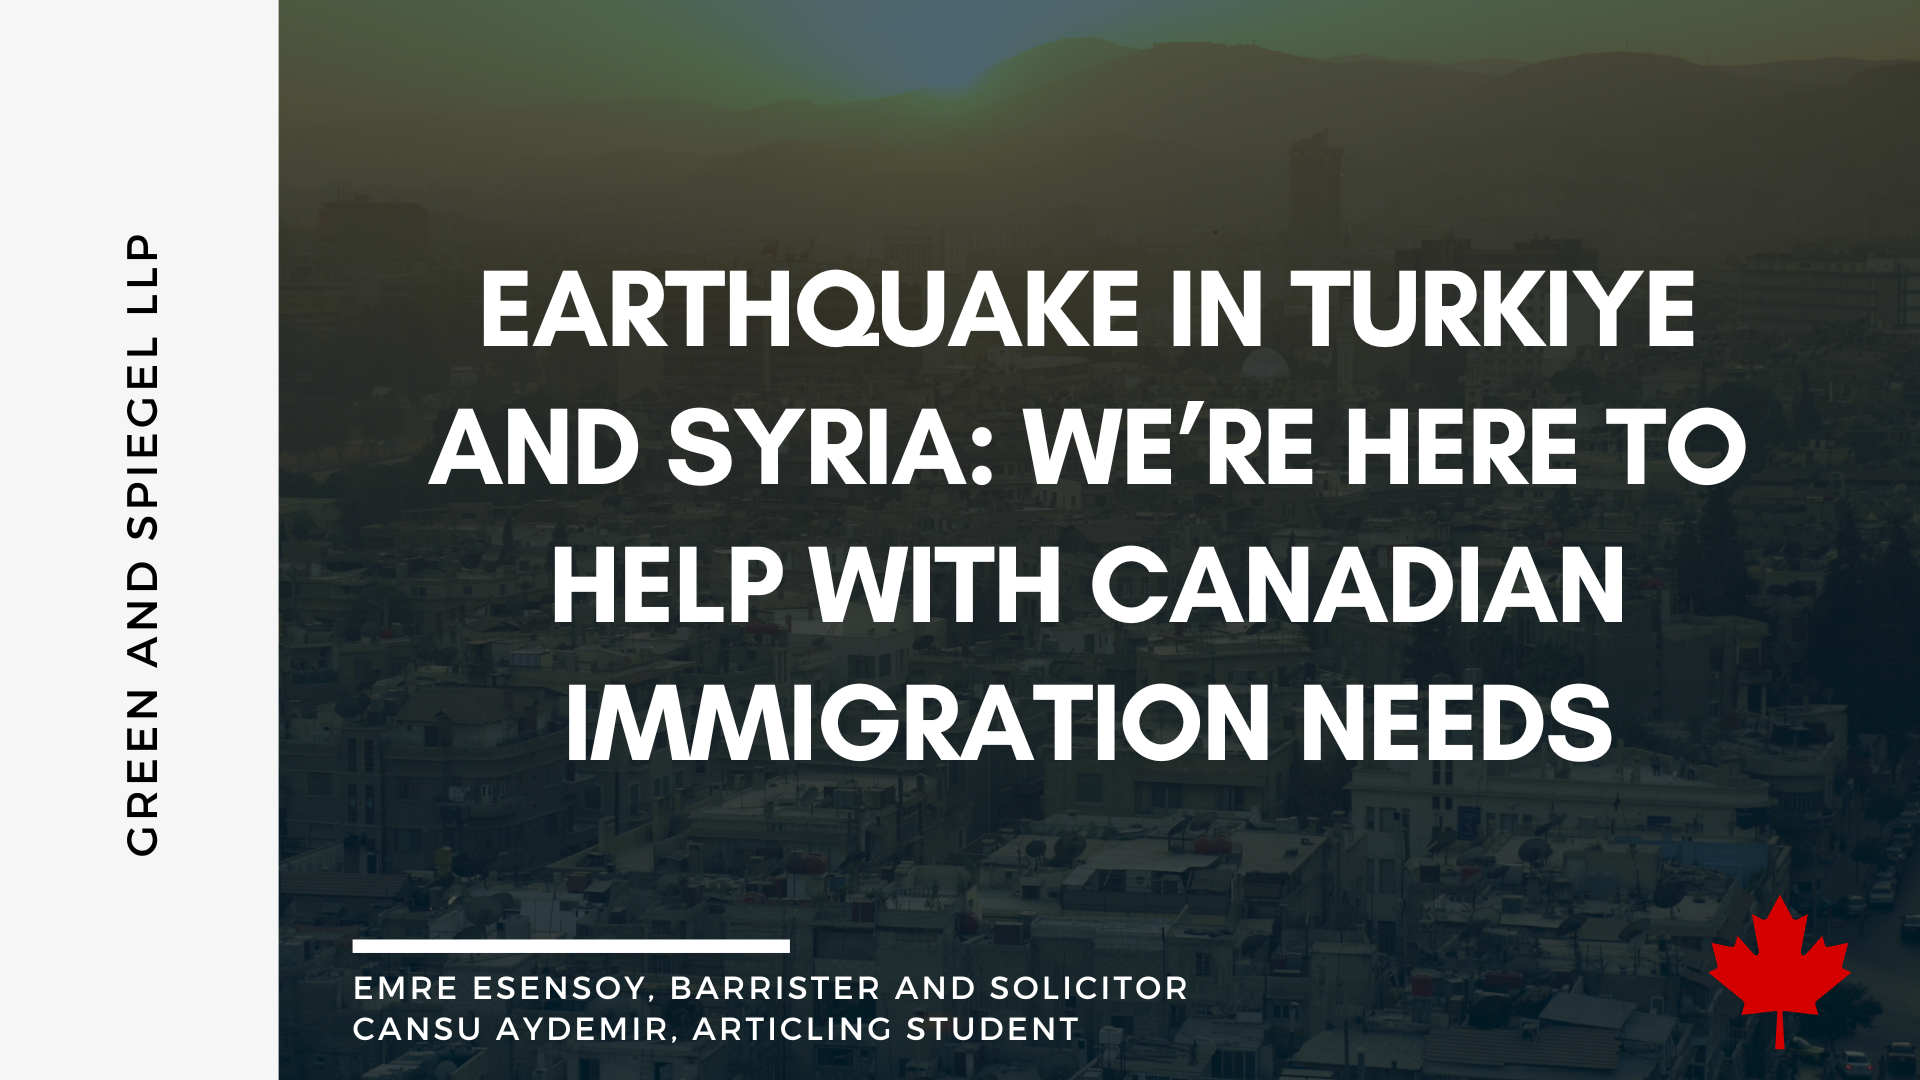  EARTHQUAKE IN TURKIYE AND SYRIA: WE’RE HERE TO HELP WITH CANADIAN IMMIGRATION NEEDS 